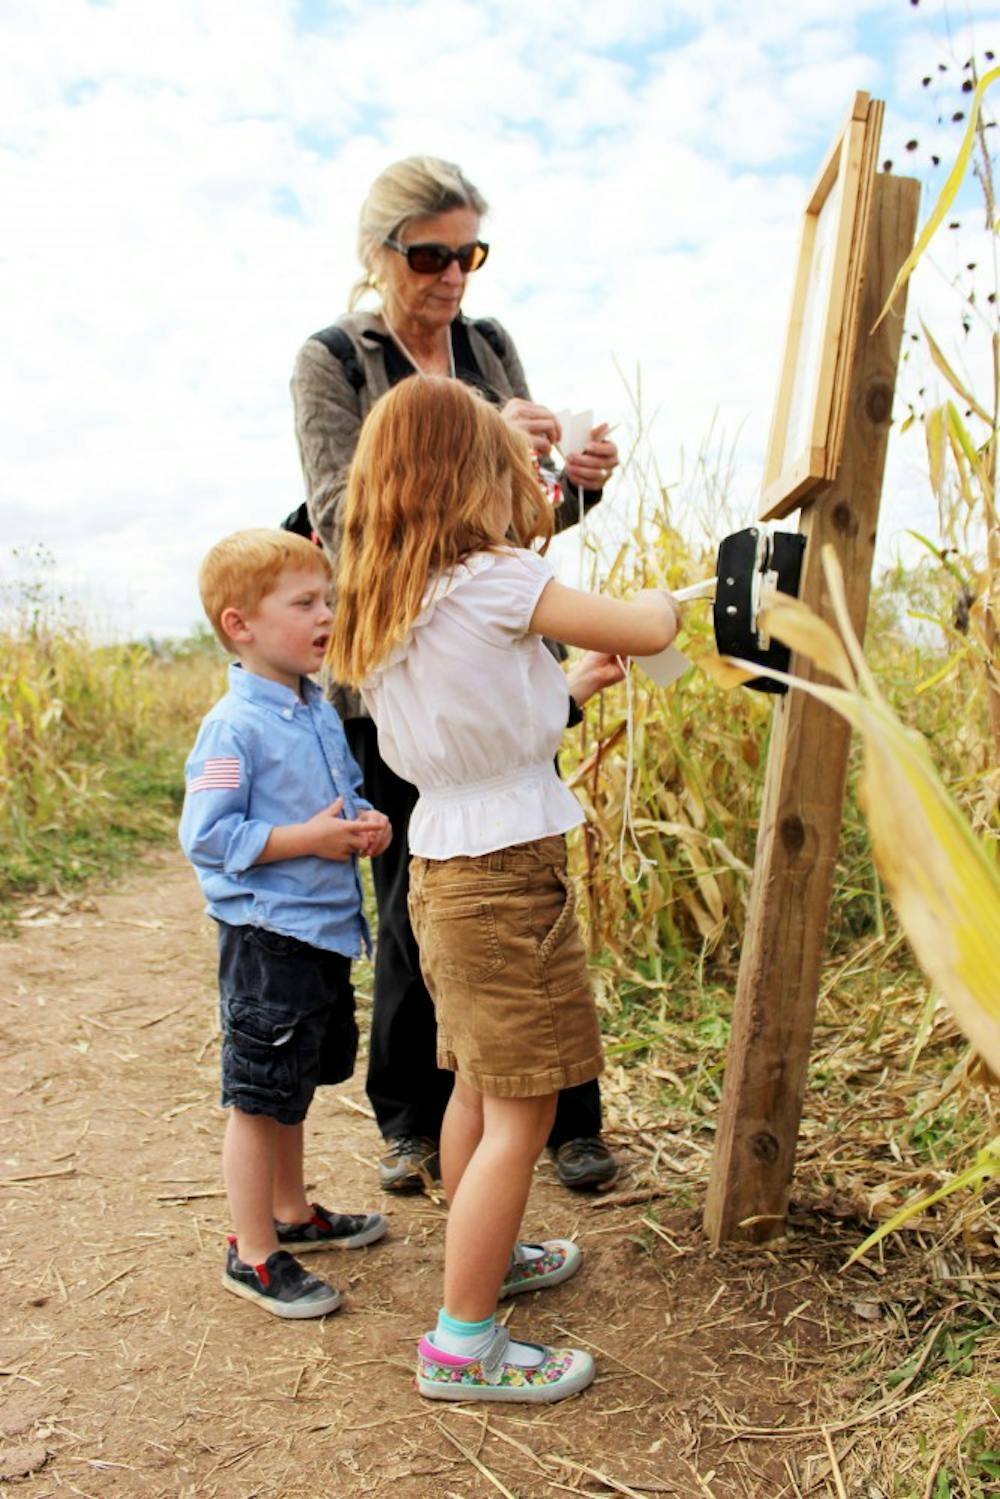 Tommy Cavanaugh (left) and his sister Claire Cavanaugh (right), collect stamps as they navigate Los Poblanos corn maze Saturday, Oct. 24, 2015. Los Poblanos gives a family friendly atmosphere during the Halloween season for people who dont like traditional Halloween activities.